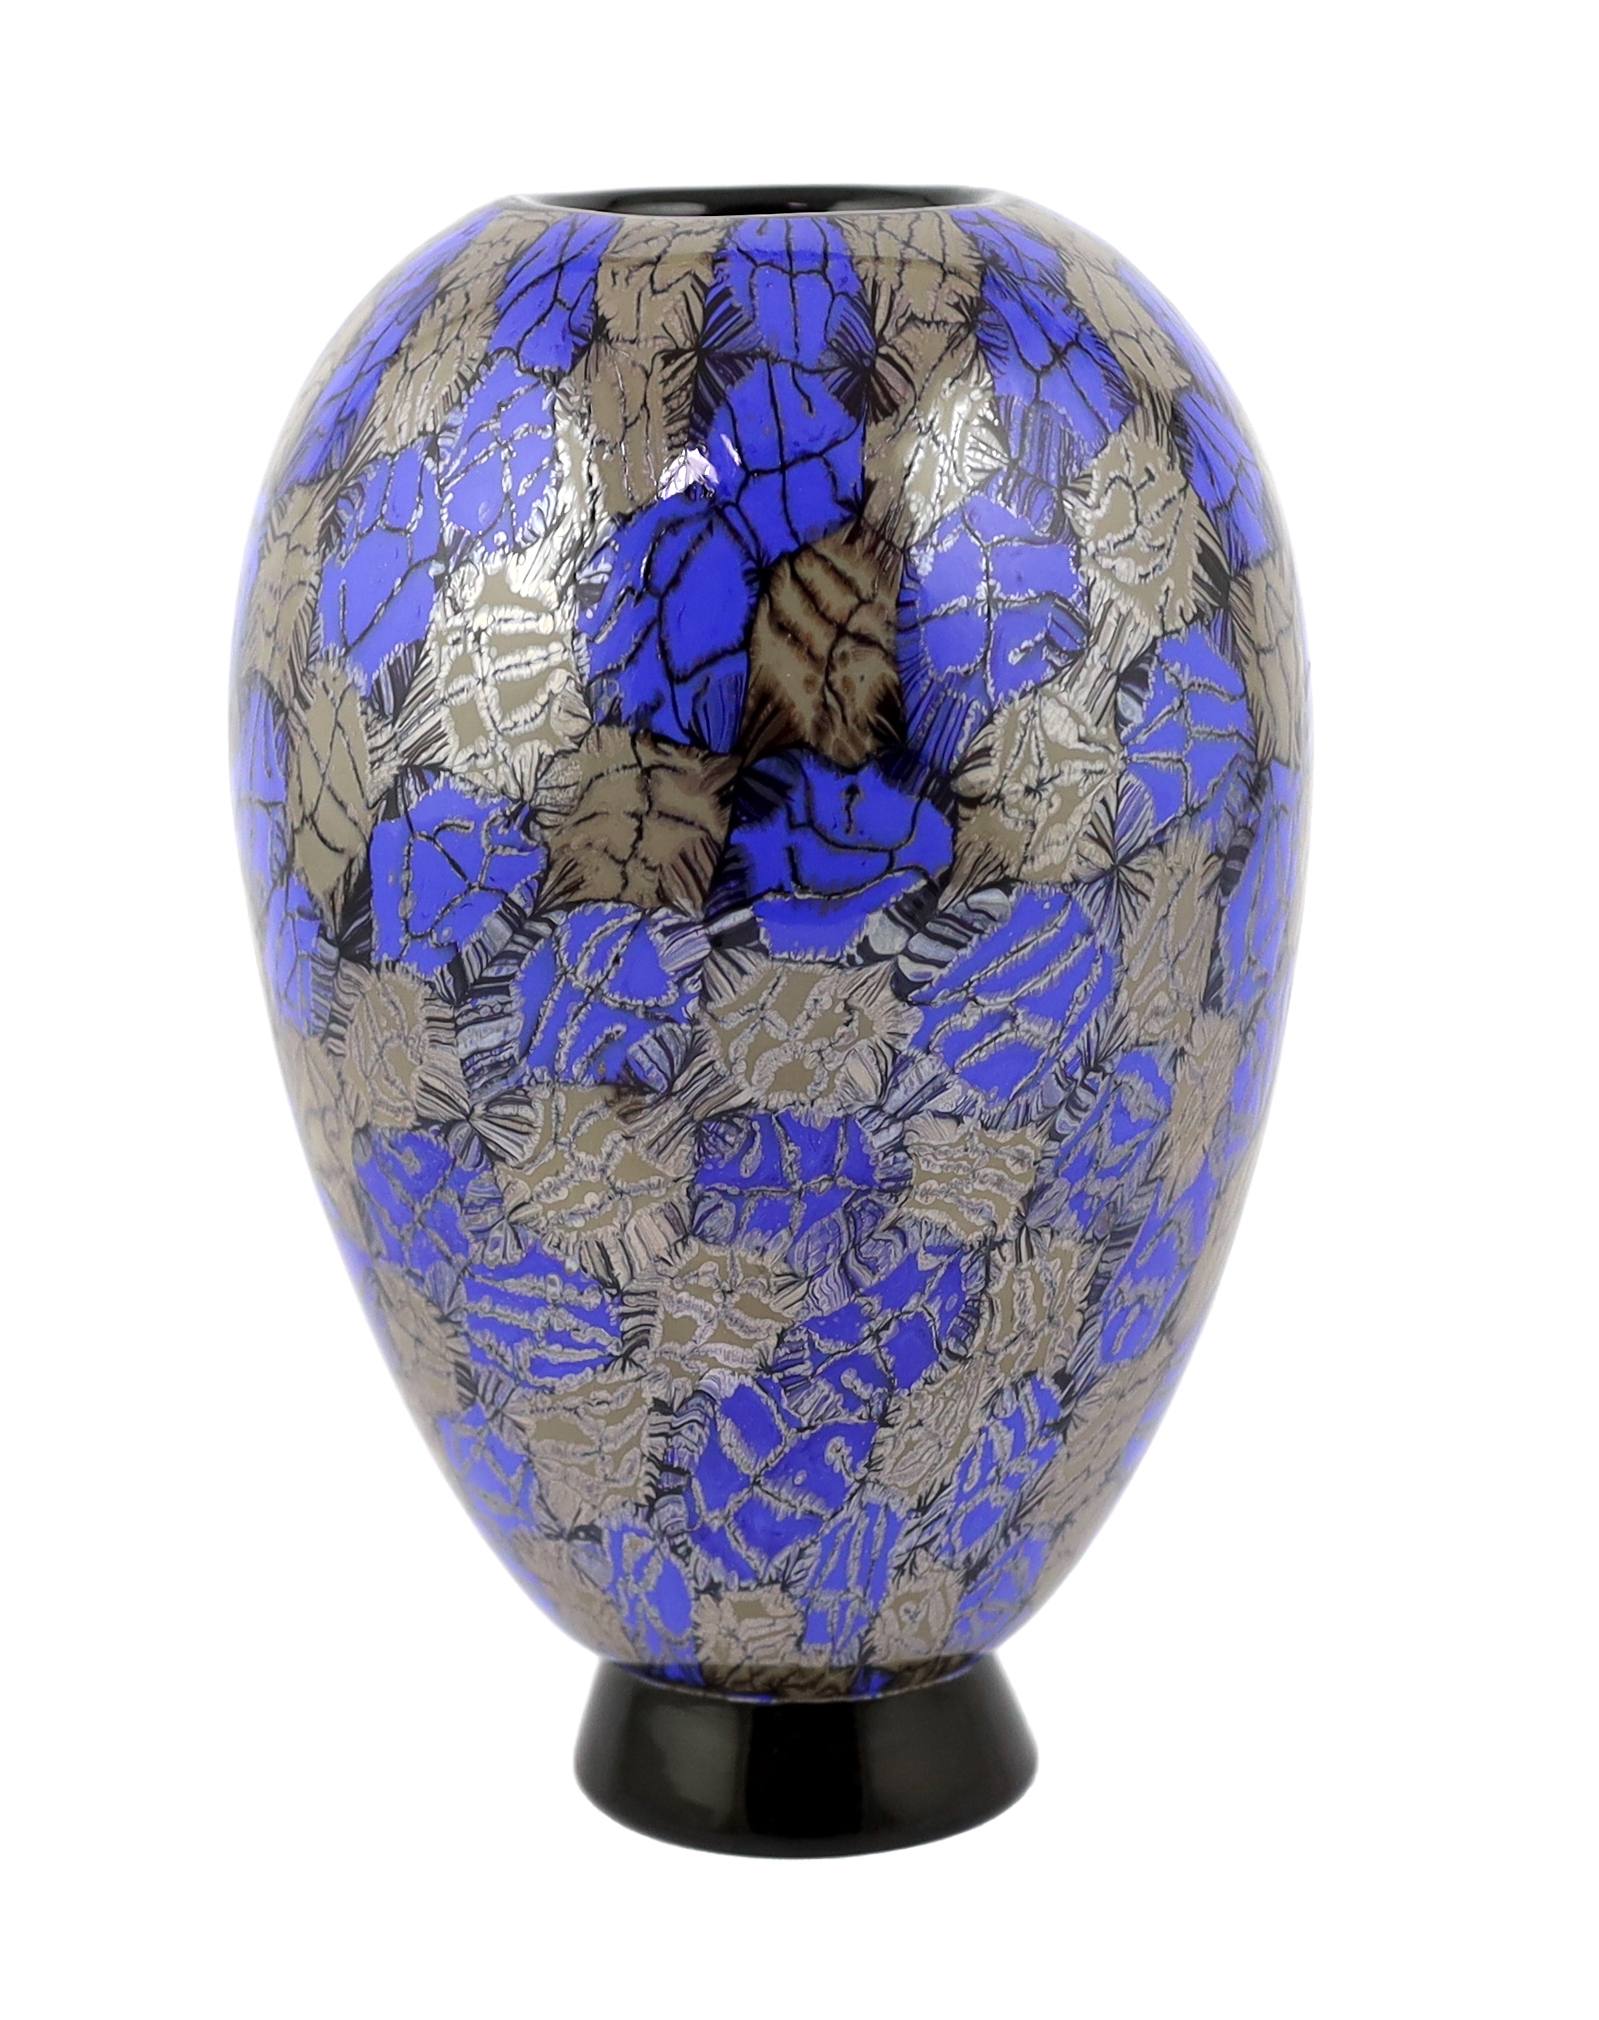 Vittorio Ferro (1932-2012) for Fratelli Pagnin. A Murano glass Murrine vase, in blue and grey, signed, 24cm, Please note this lot attracts an additional import tax of 20% on the hammer price